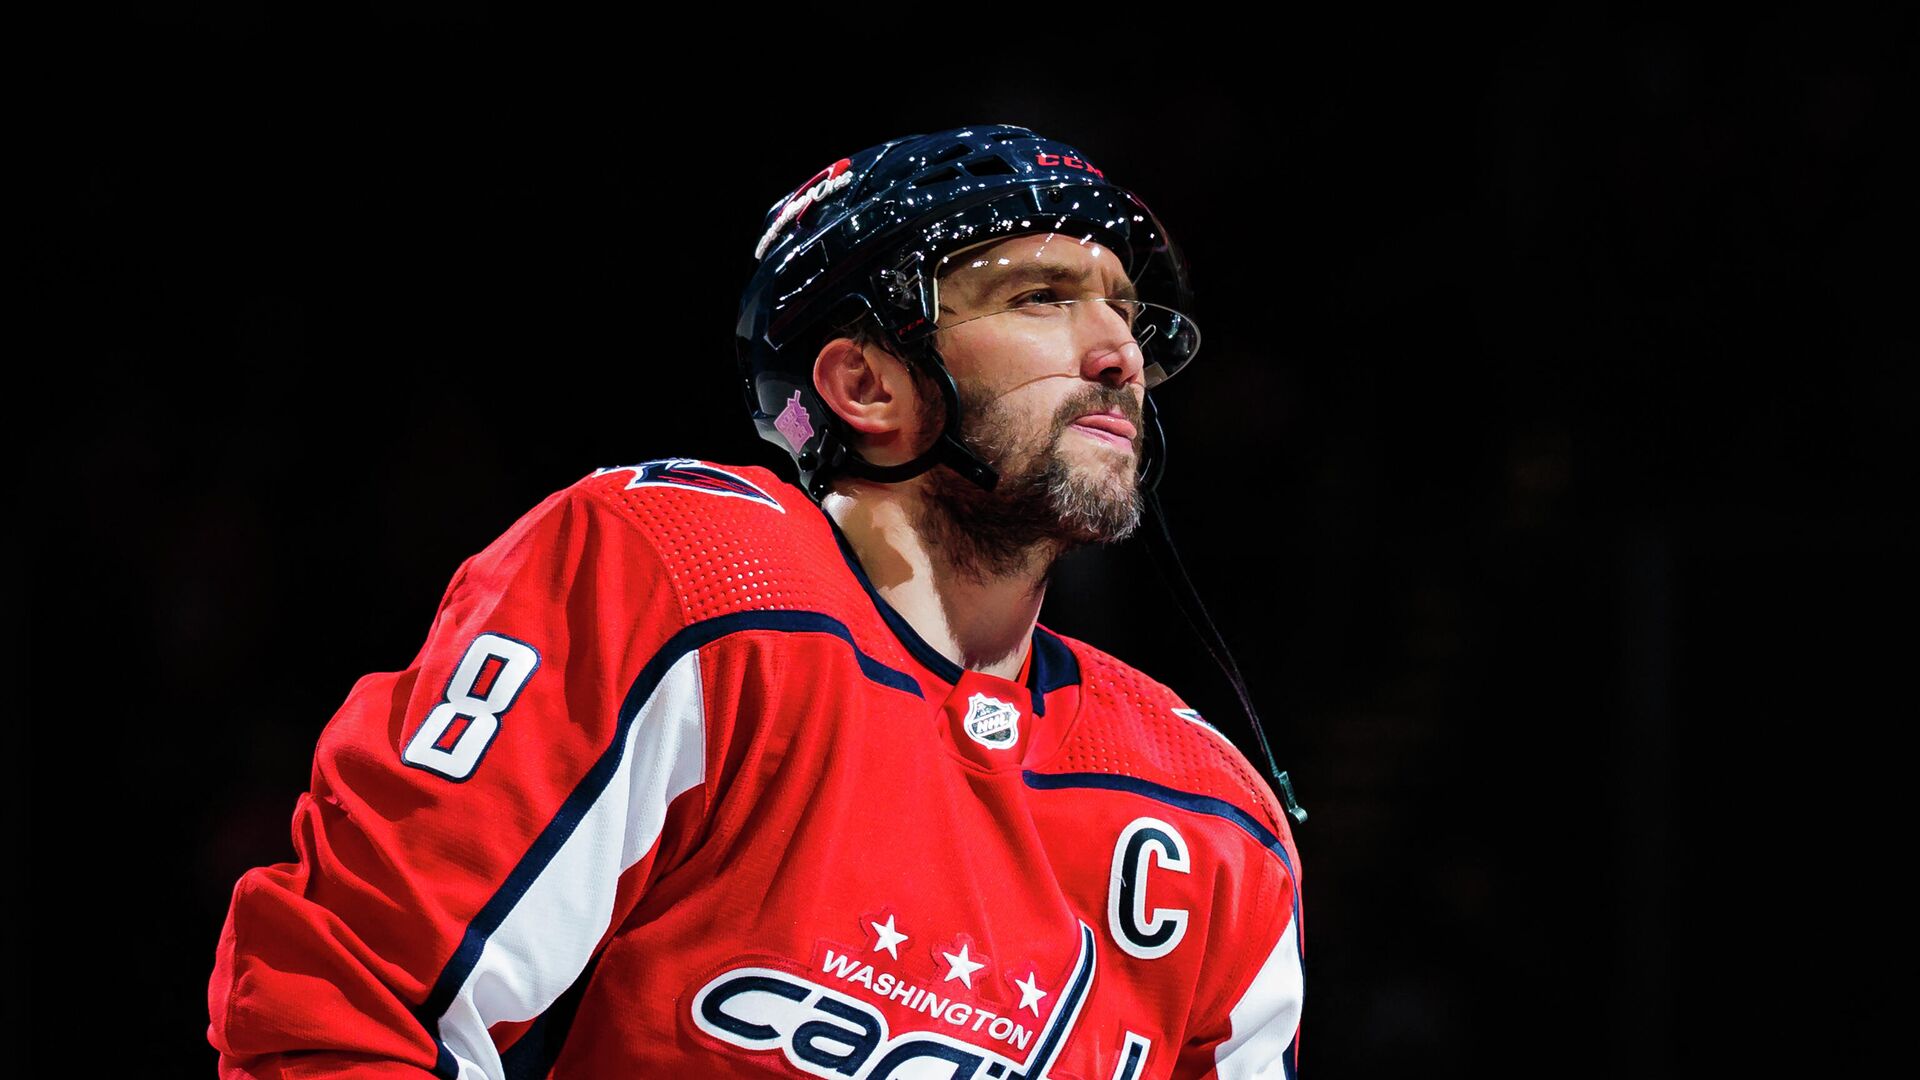 WASHINGTON, DC - NOVEMBER 24: Alex Ovechkin #8 of the Washington Capitals looks on after the game against the Montreal Canadiens at Capital One Arena on November 24, 2021 in Washington, DC.   Scott Taetsch/Getty Images/AFP (Photo by Scott Taetsch / GETTY IMAGES NORTH AMERICA / Getty Images via AFP) - РИА Новости, 1920, 28.11.2021